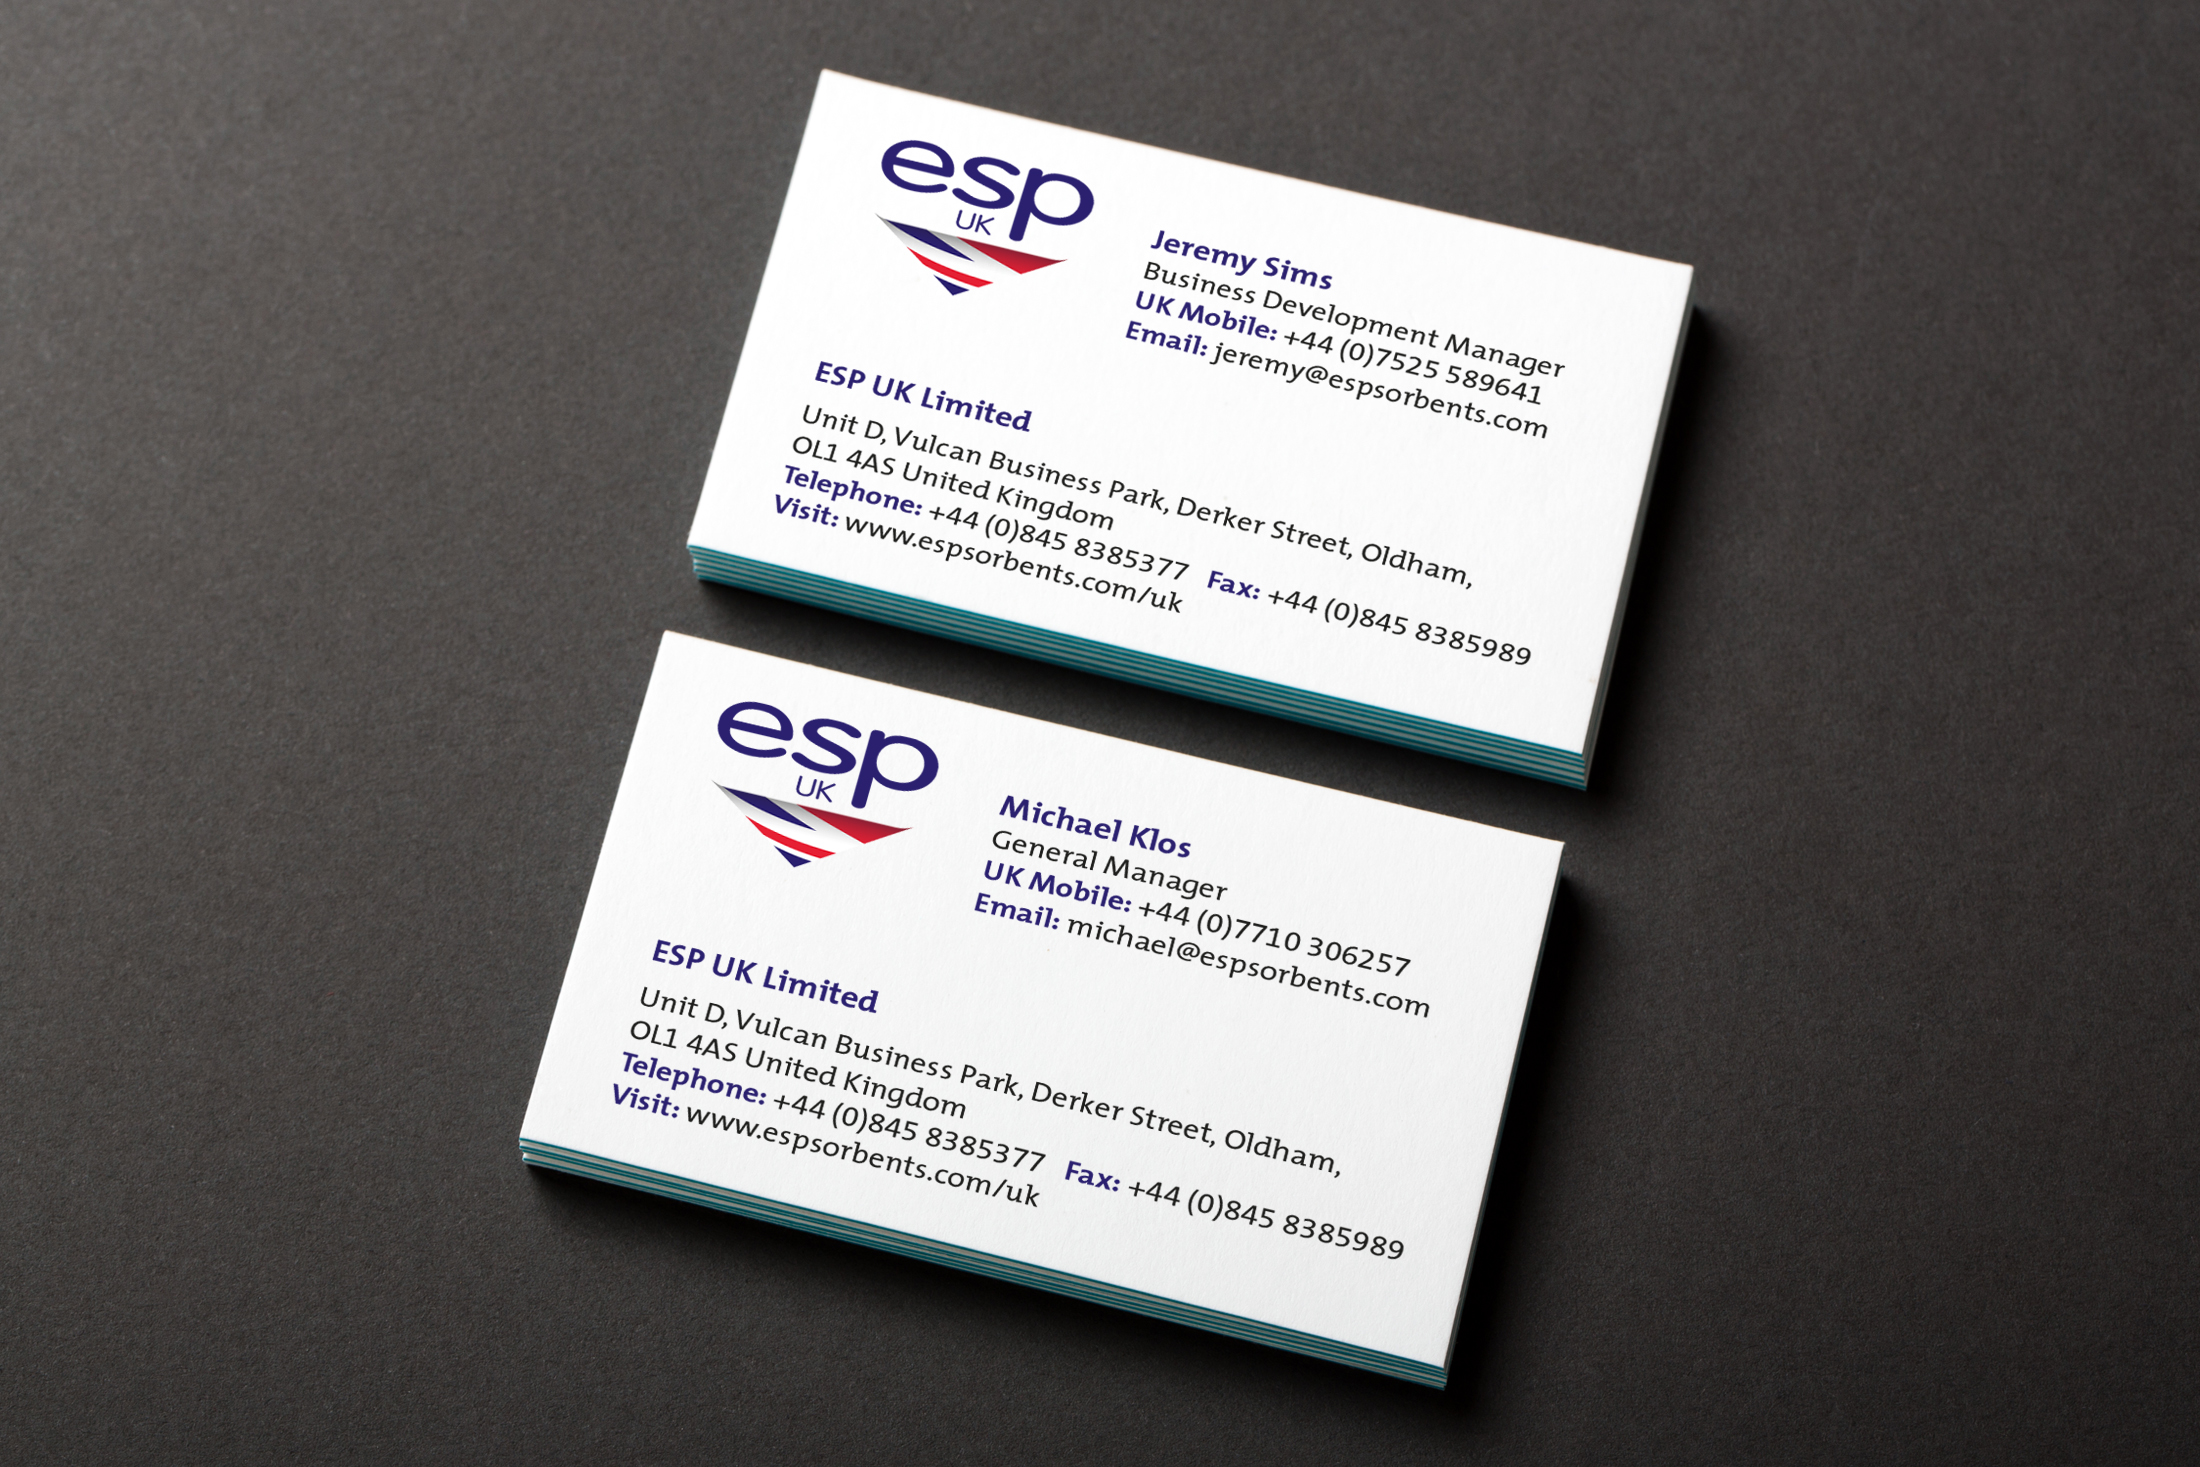 image of business cards for ESP UK